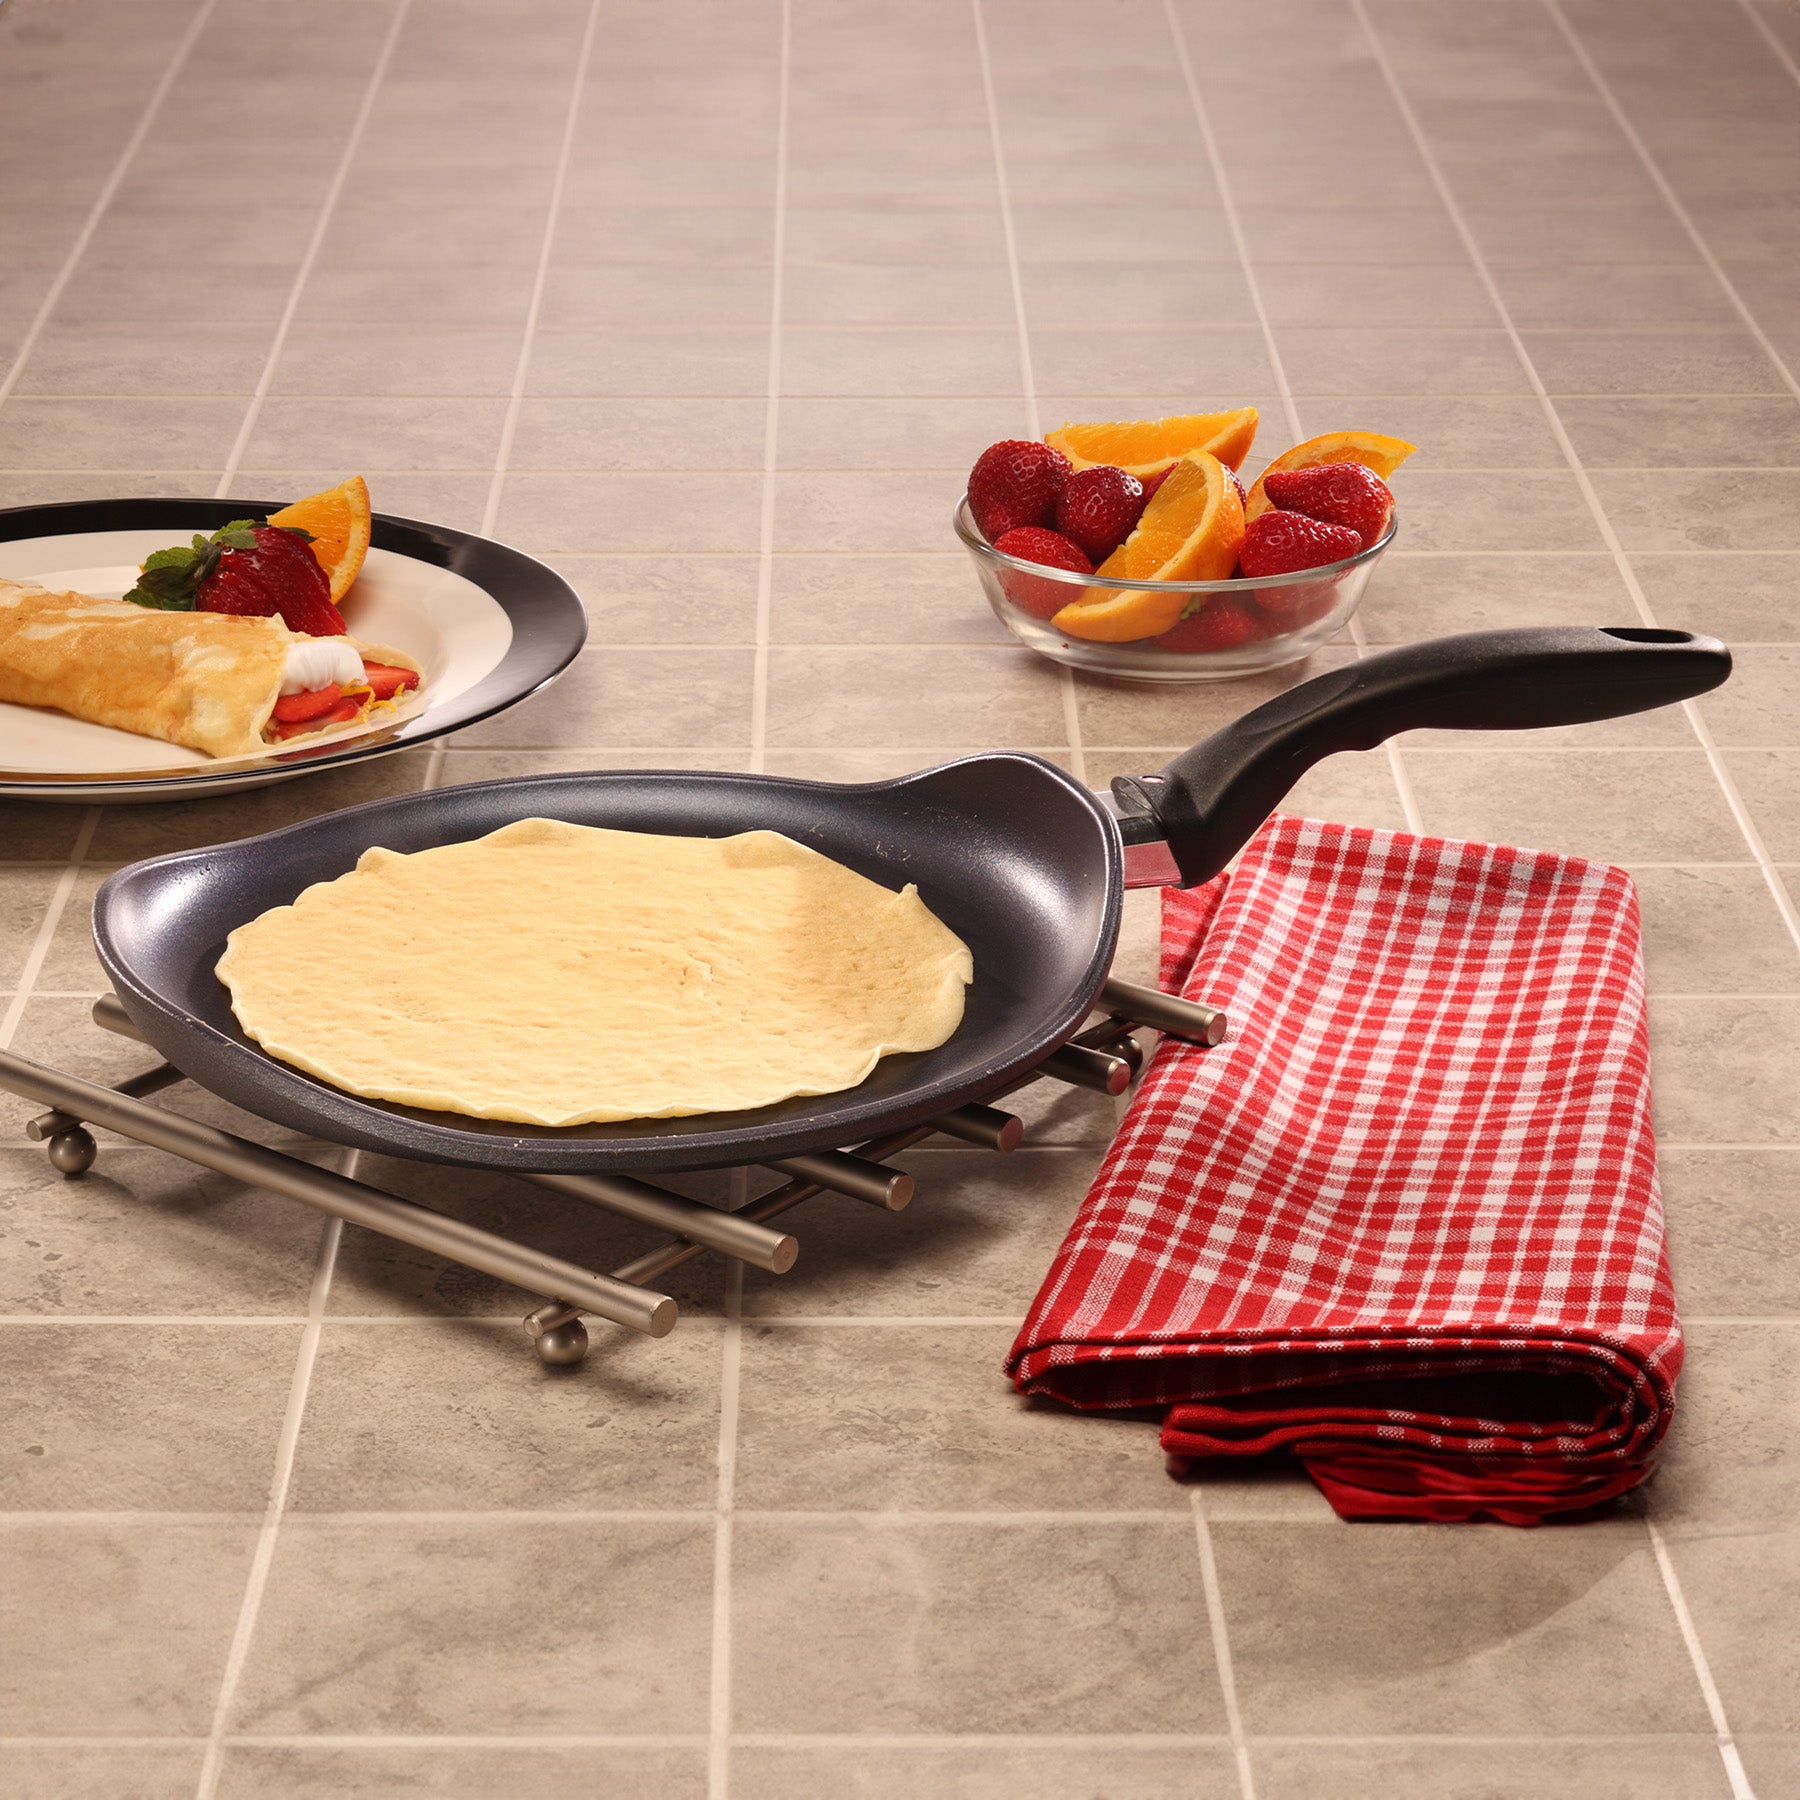 HD Nonstick Crepe Pan - Induction in use on dining room table